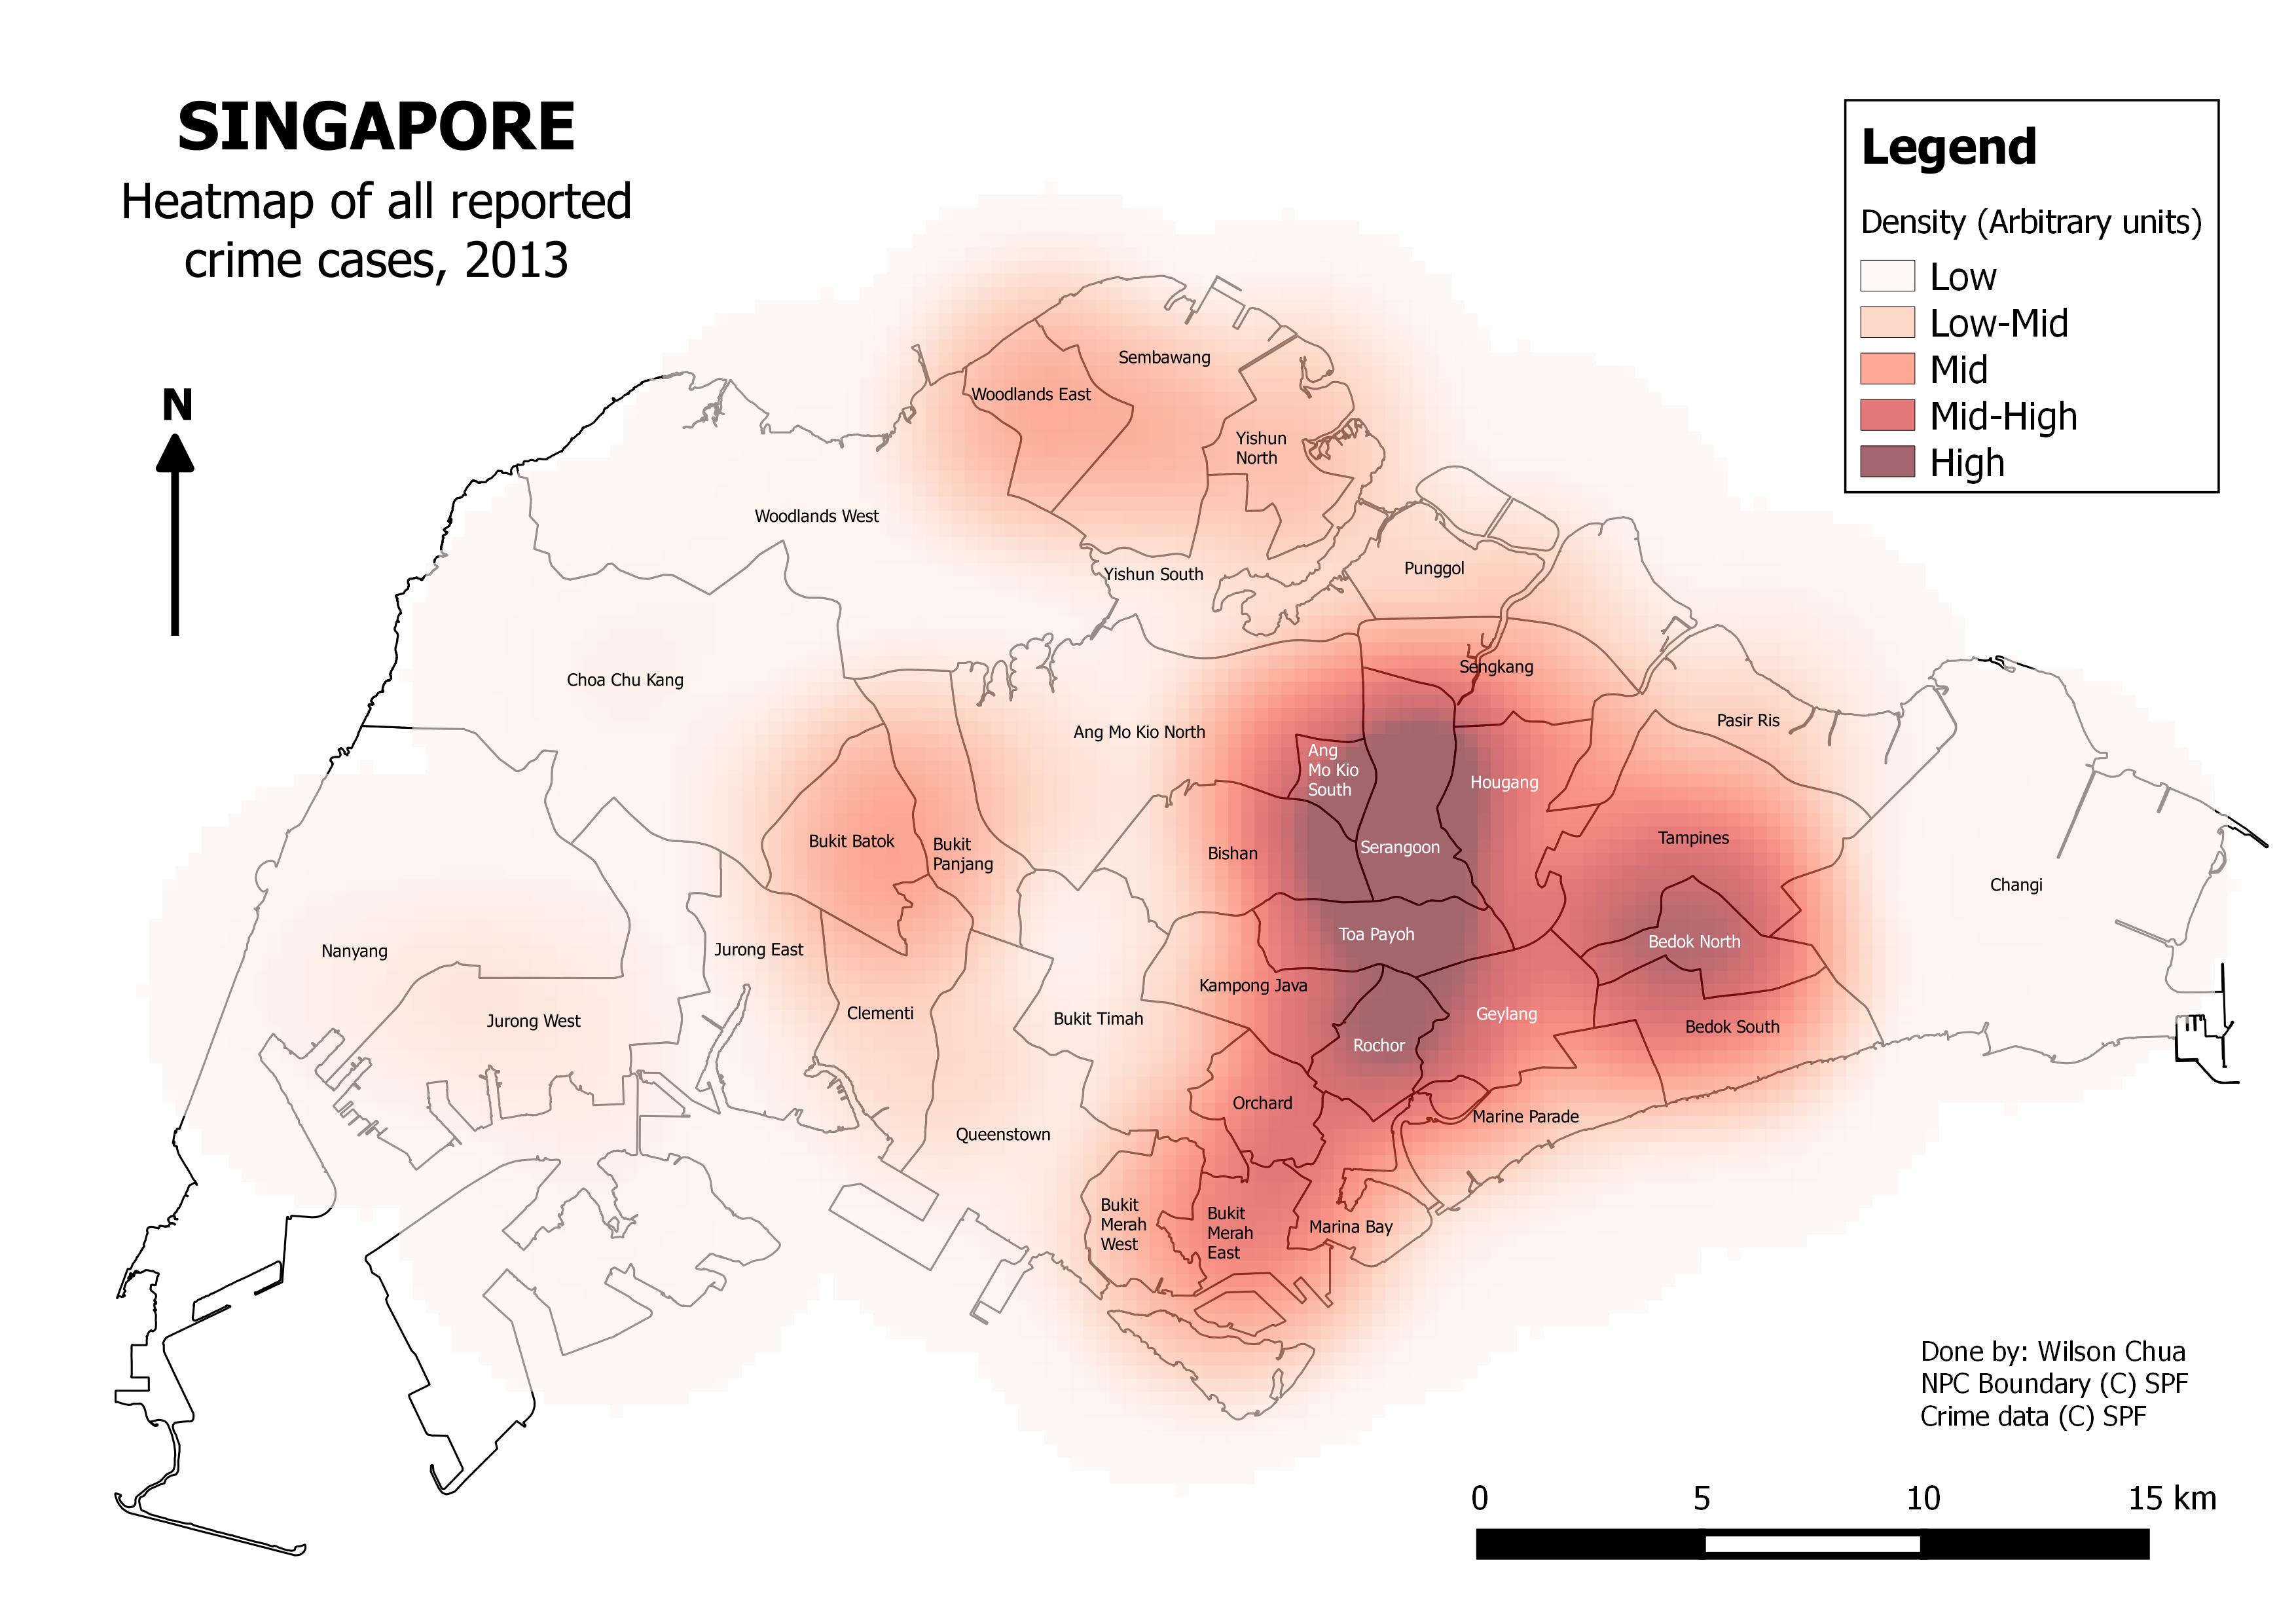 Quick Reminder — it’s 2022. Time to Grow Up and Stop Vilifying Yishun